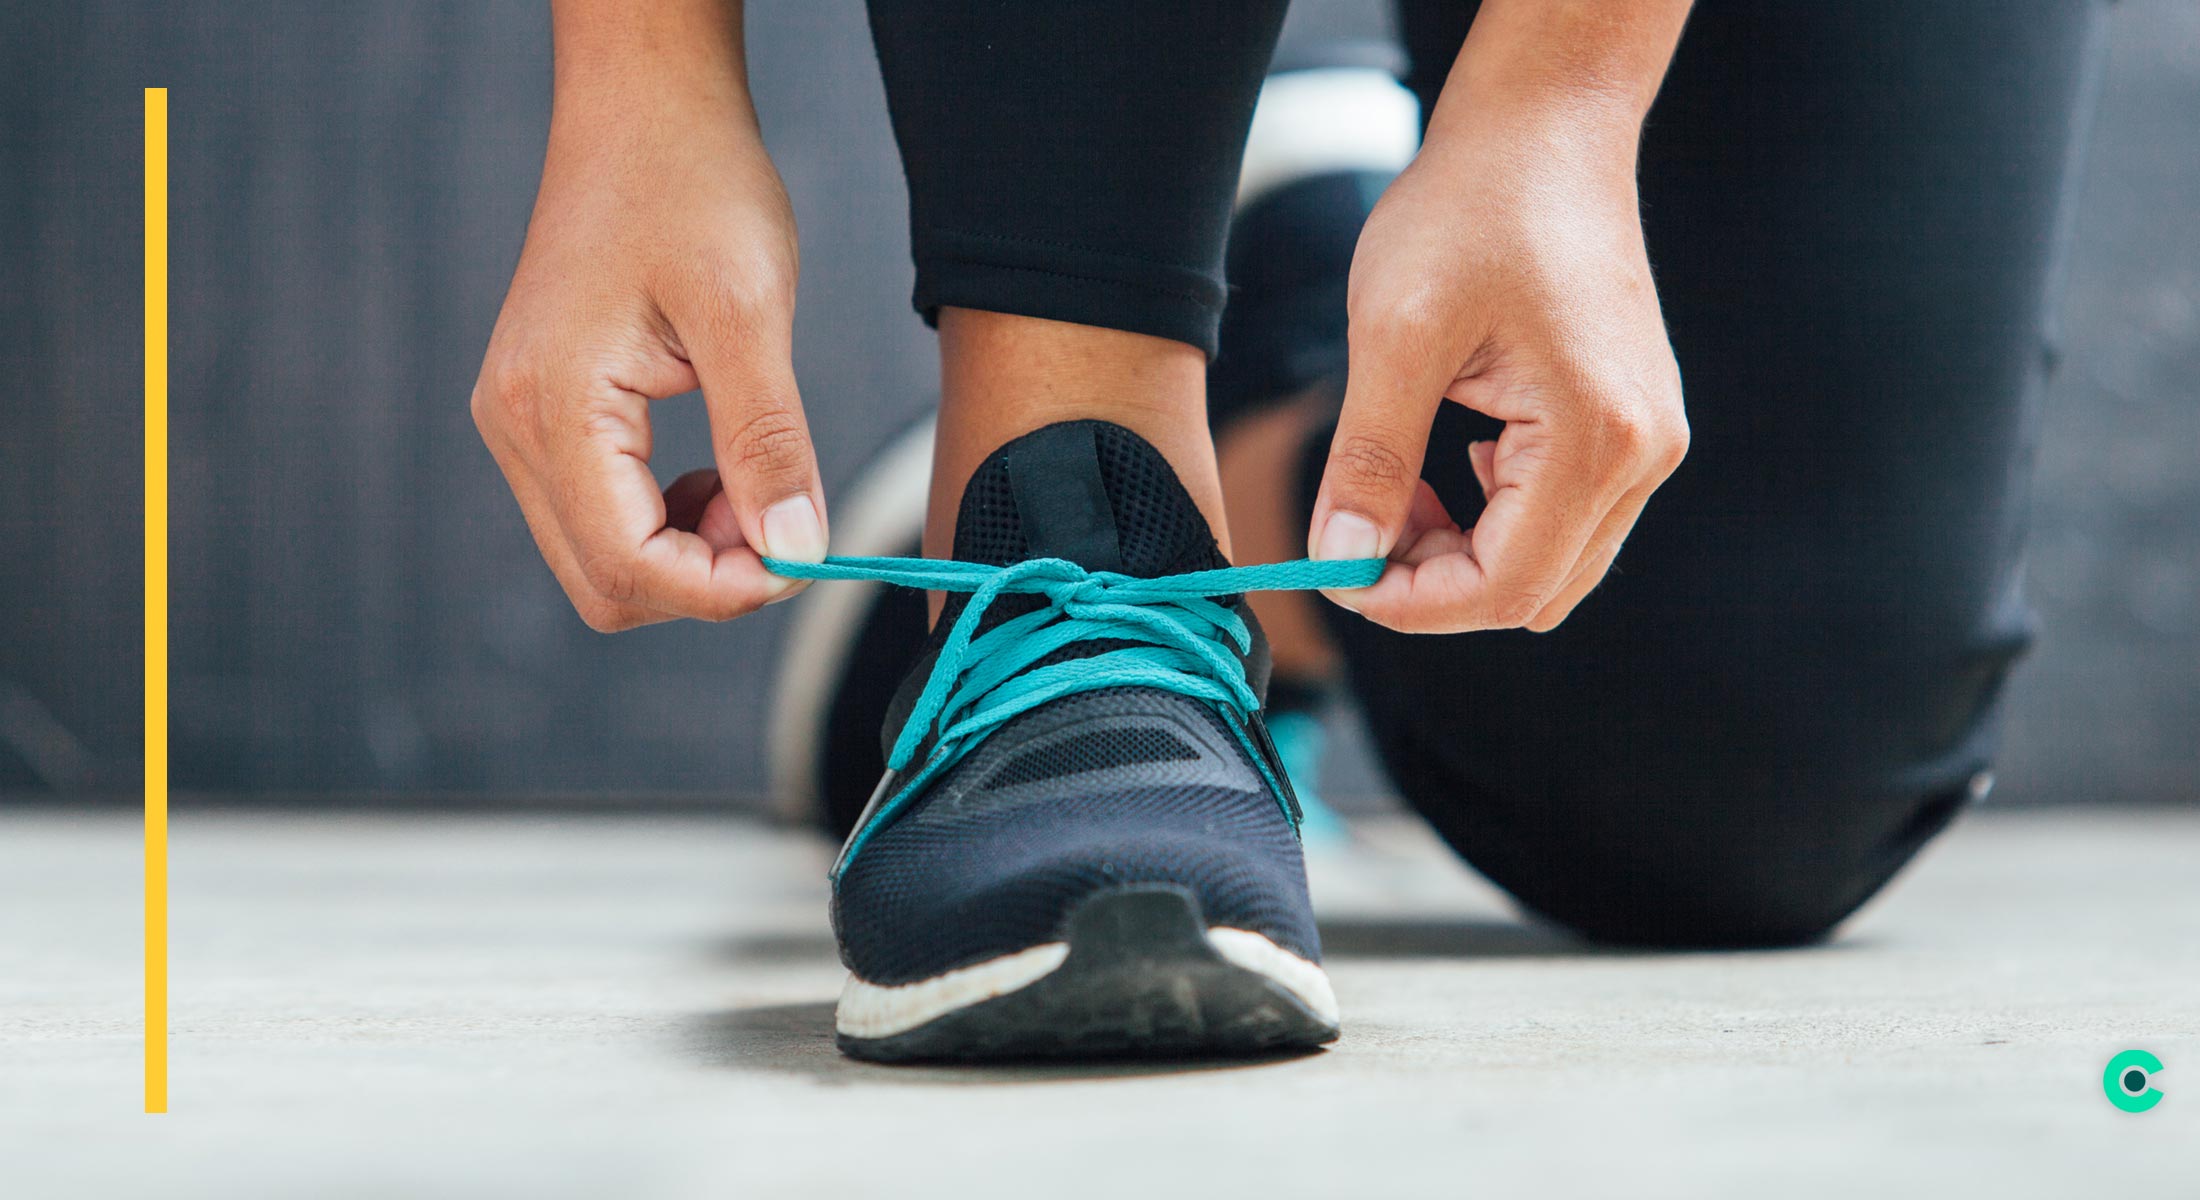 Close up of woman's foot while tying her running shoe